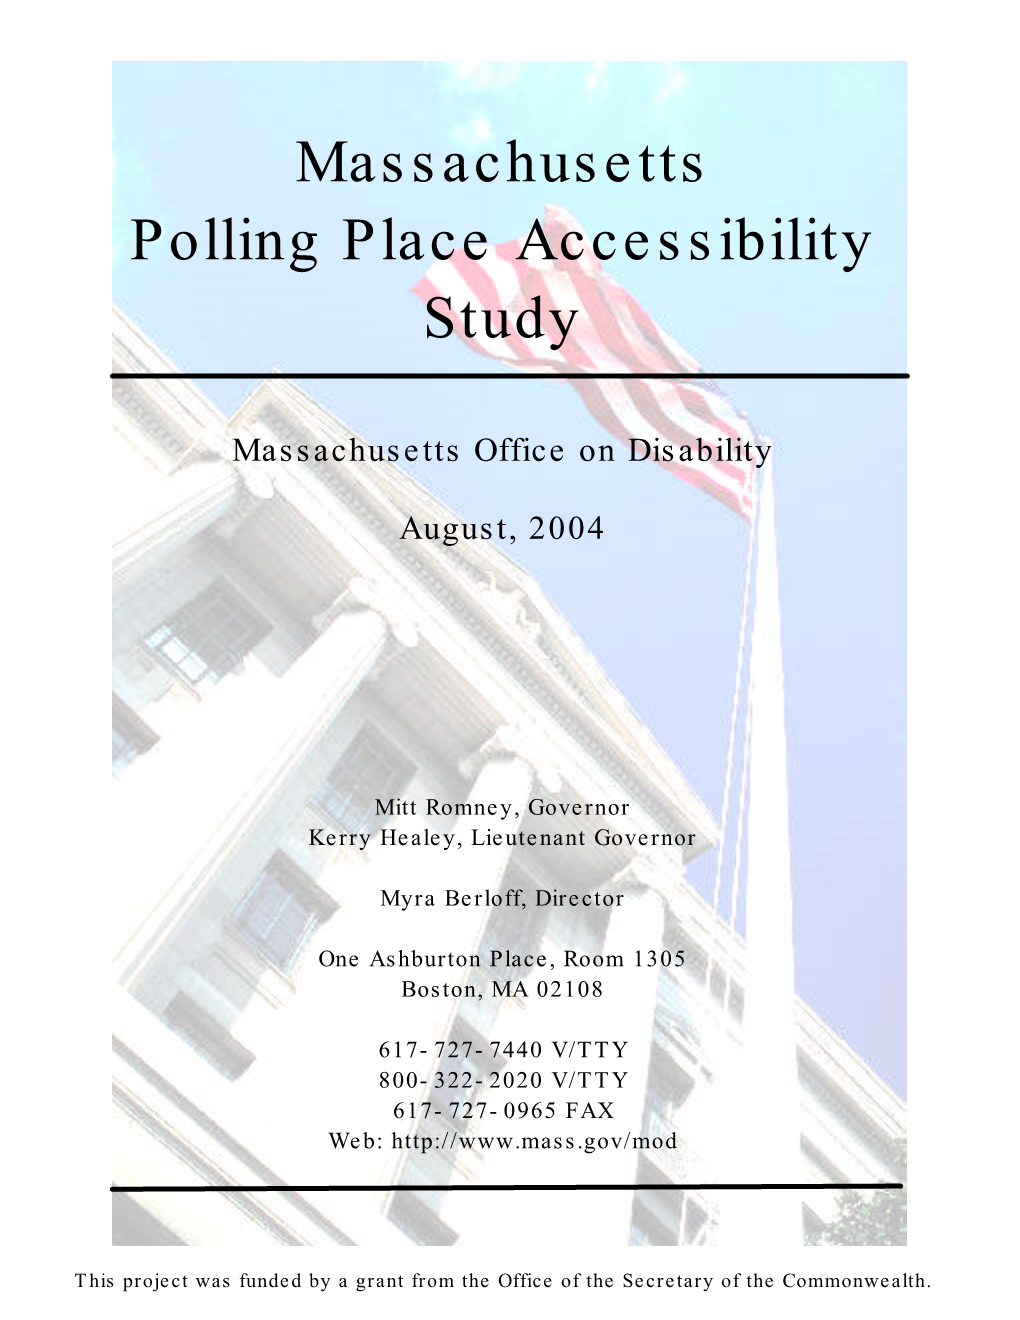 Massachusetts Polling Place Accessibility Study